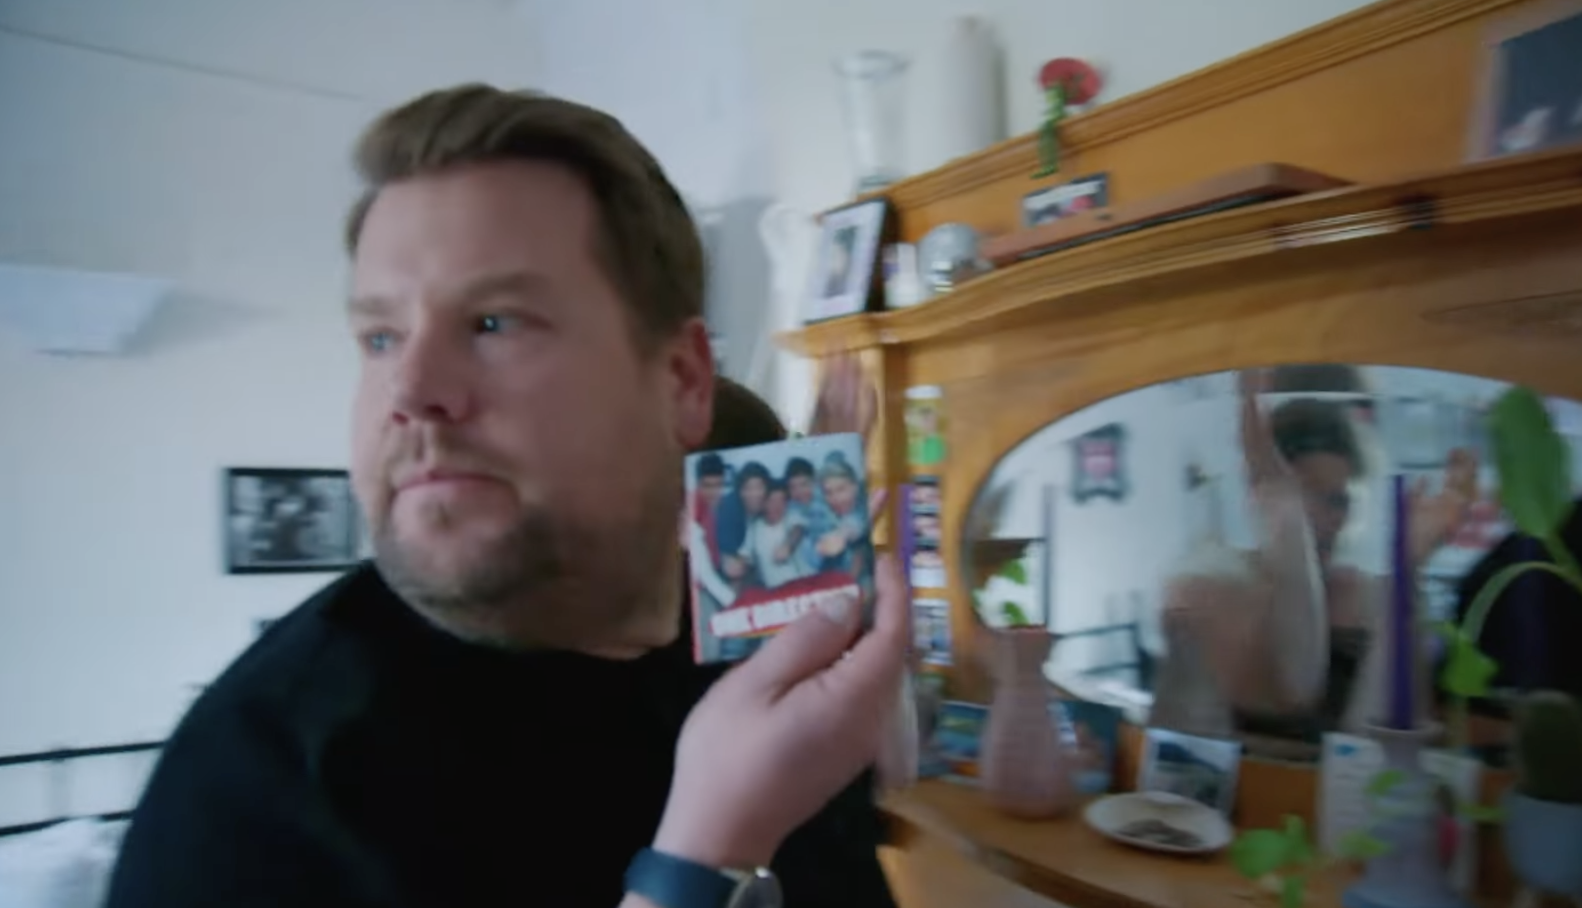 Corden holds up an object and looks at the woman disapprovingly